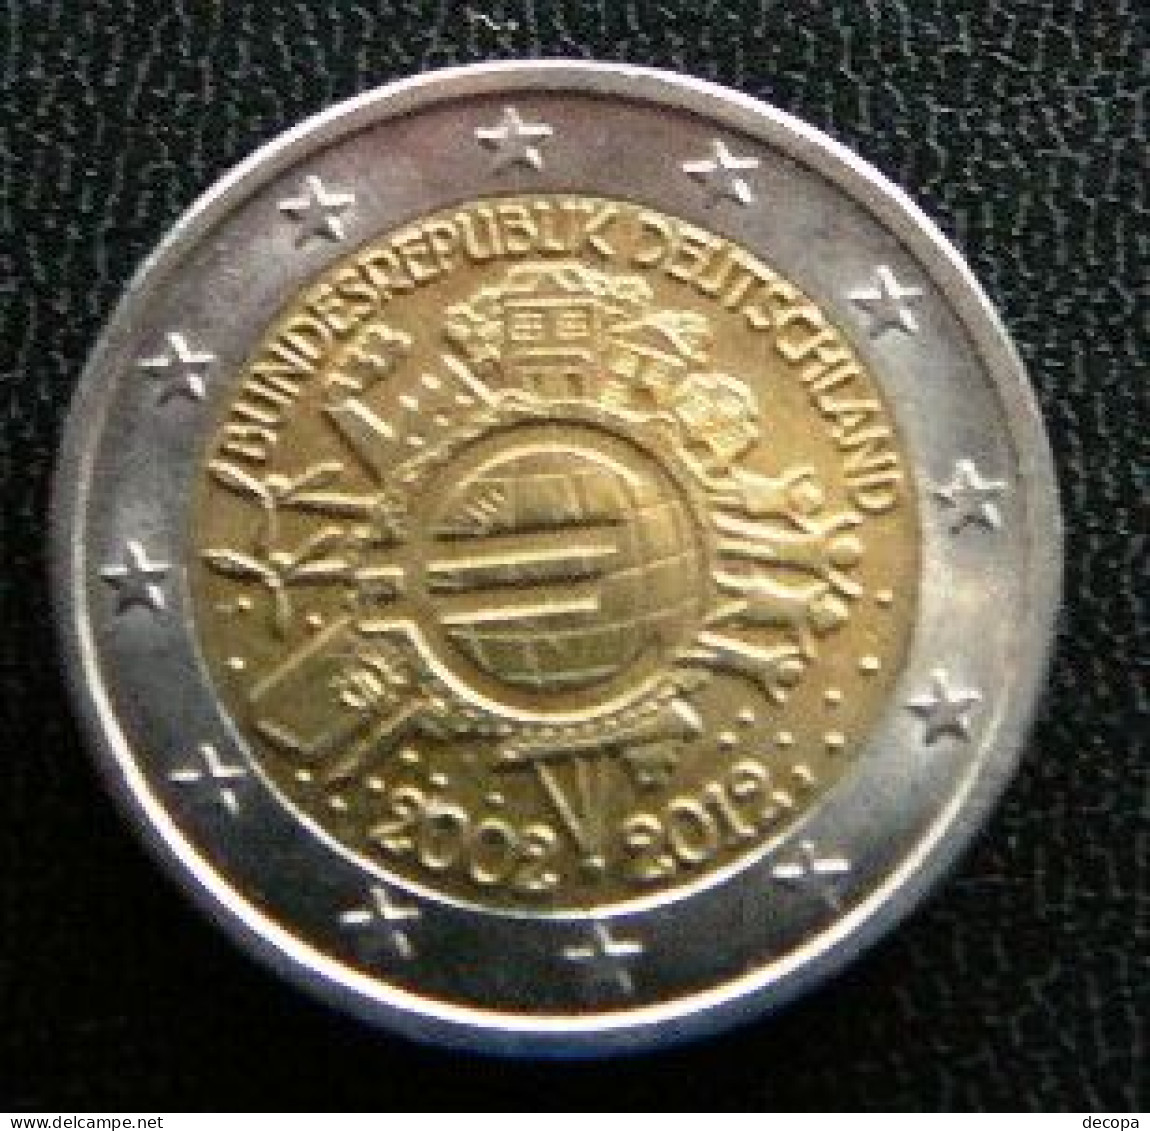 Germany - Allemagne - Duitsland   2 EURO 2012 J   10 Years Euro      Speciale Uitgave - Commemorative - Alemania